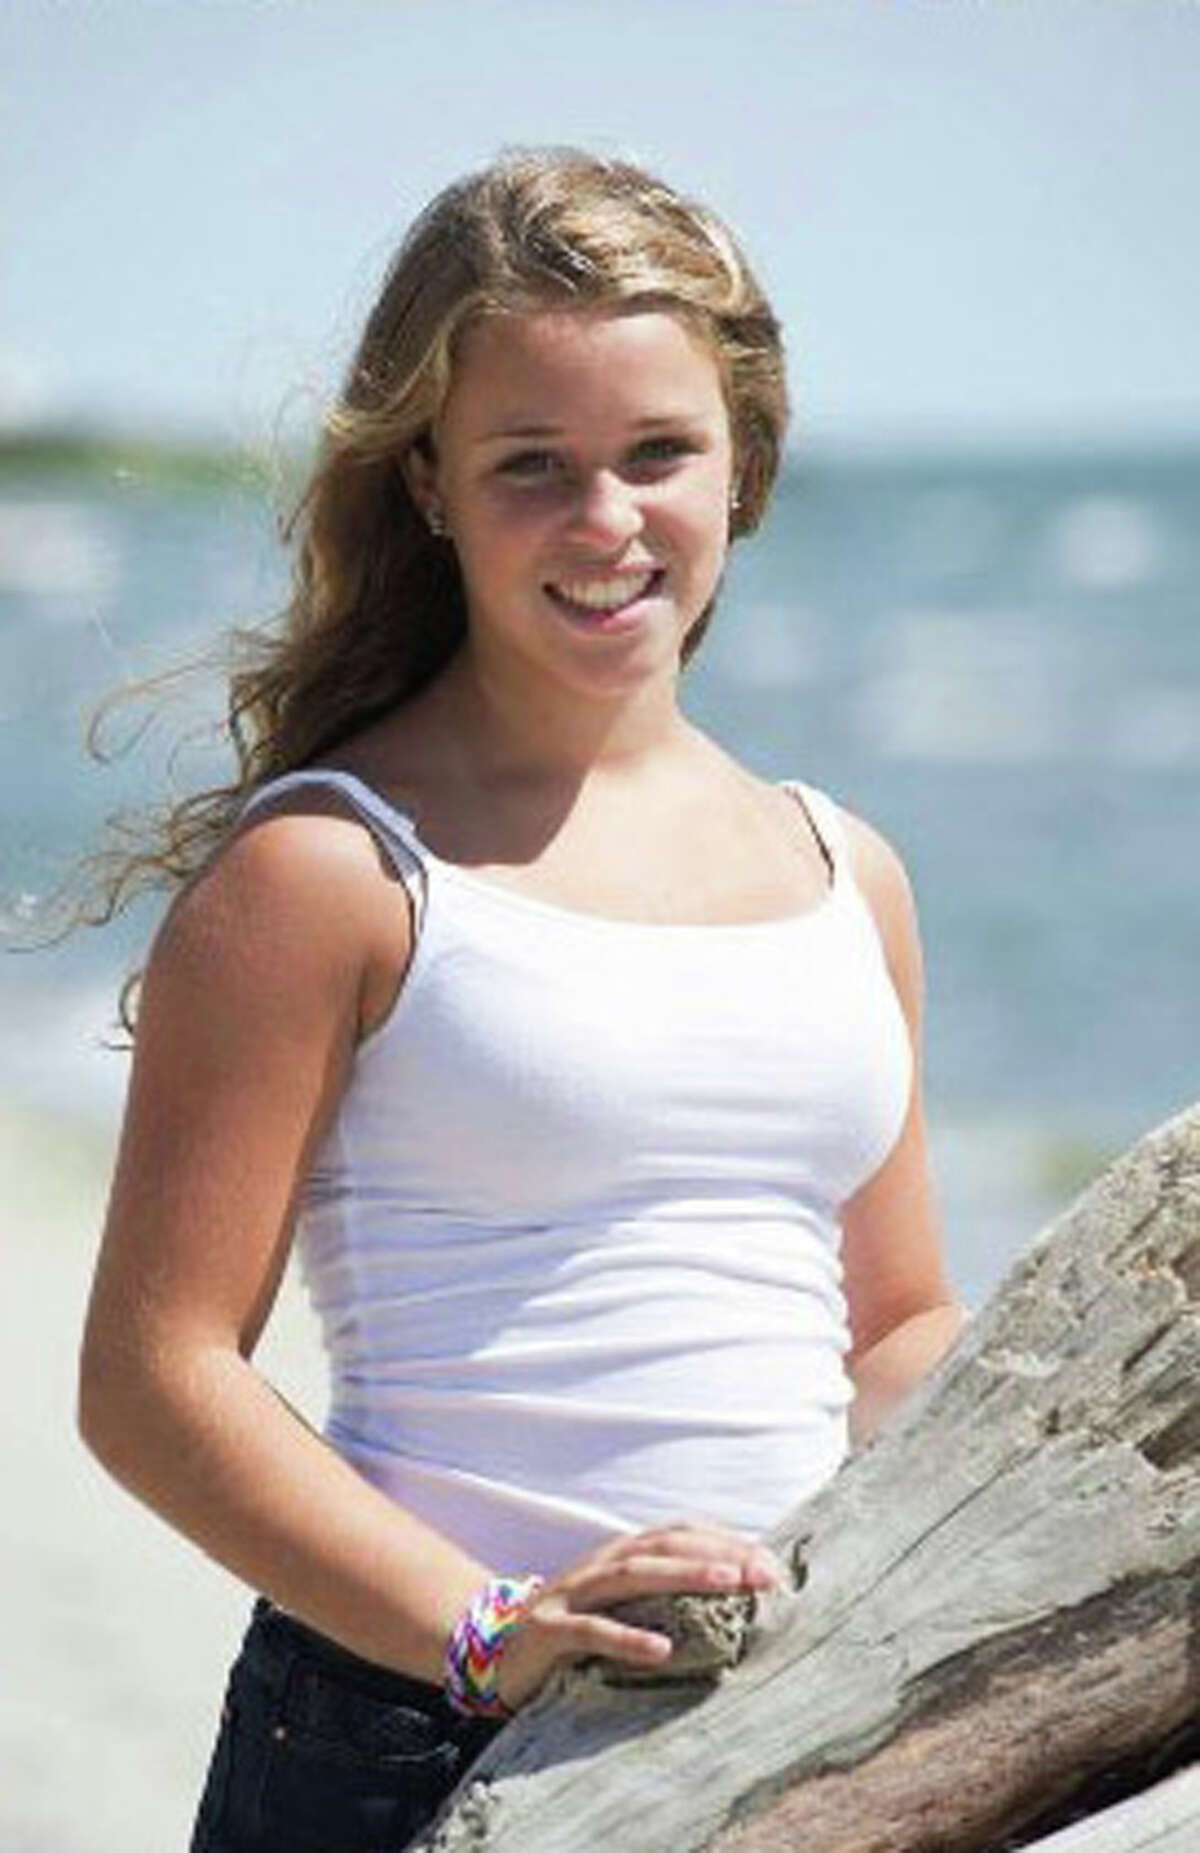 Emily Fedorko was killed in a 2014 boating accident. On Friday, Gov. Malloy will sign a new safety law created in her memory.